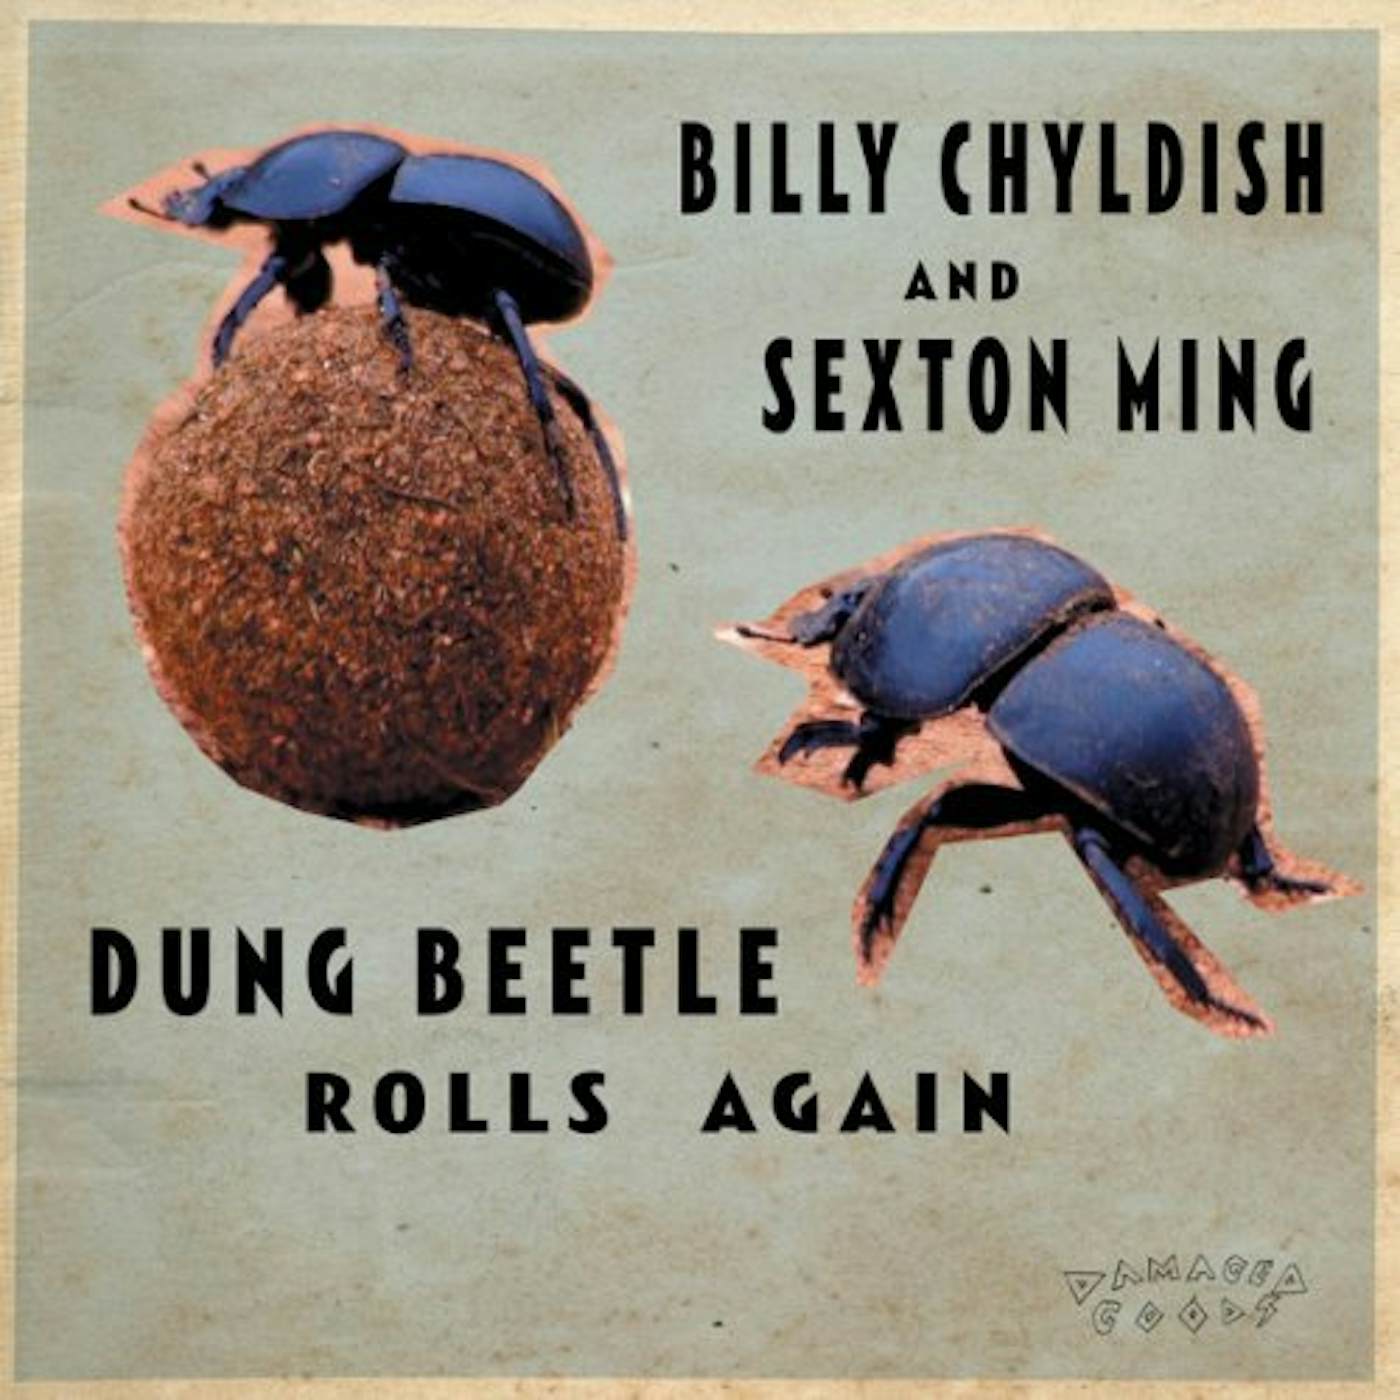 Billy Childish & Sexton Ming DUNG BEETLE ROLLS AGAIN Vinyl Record